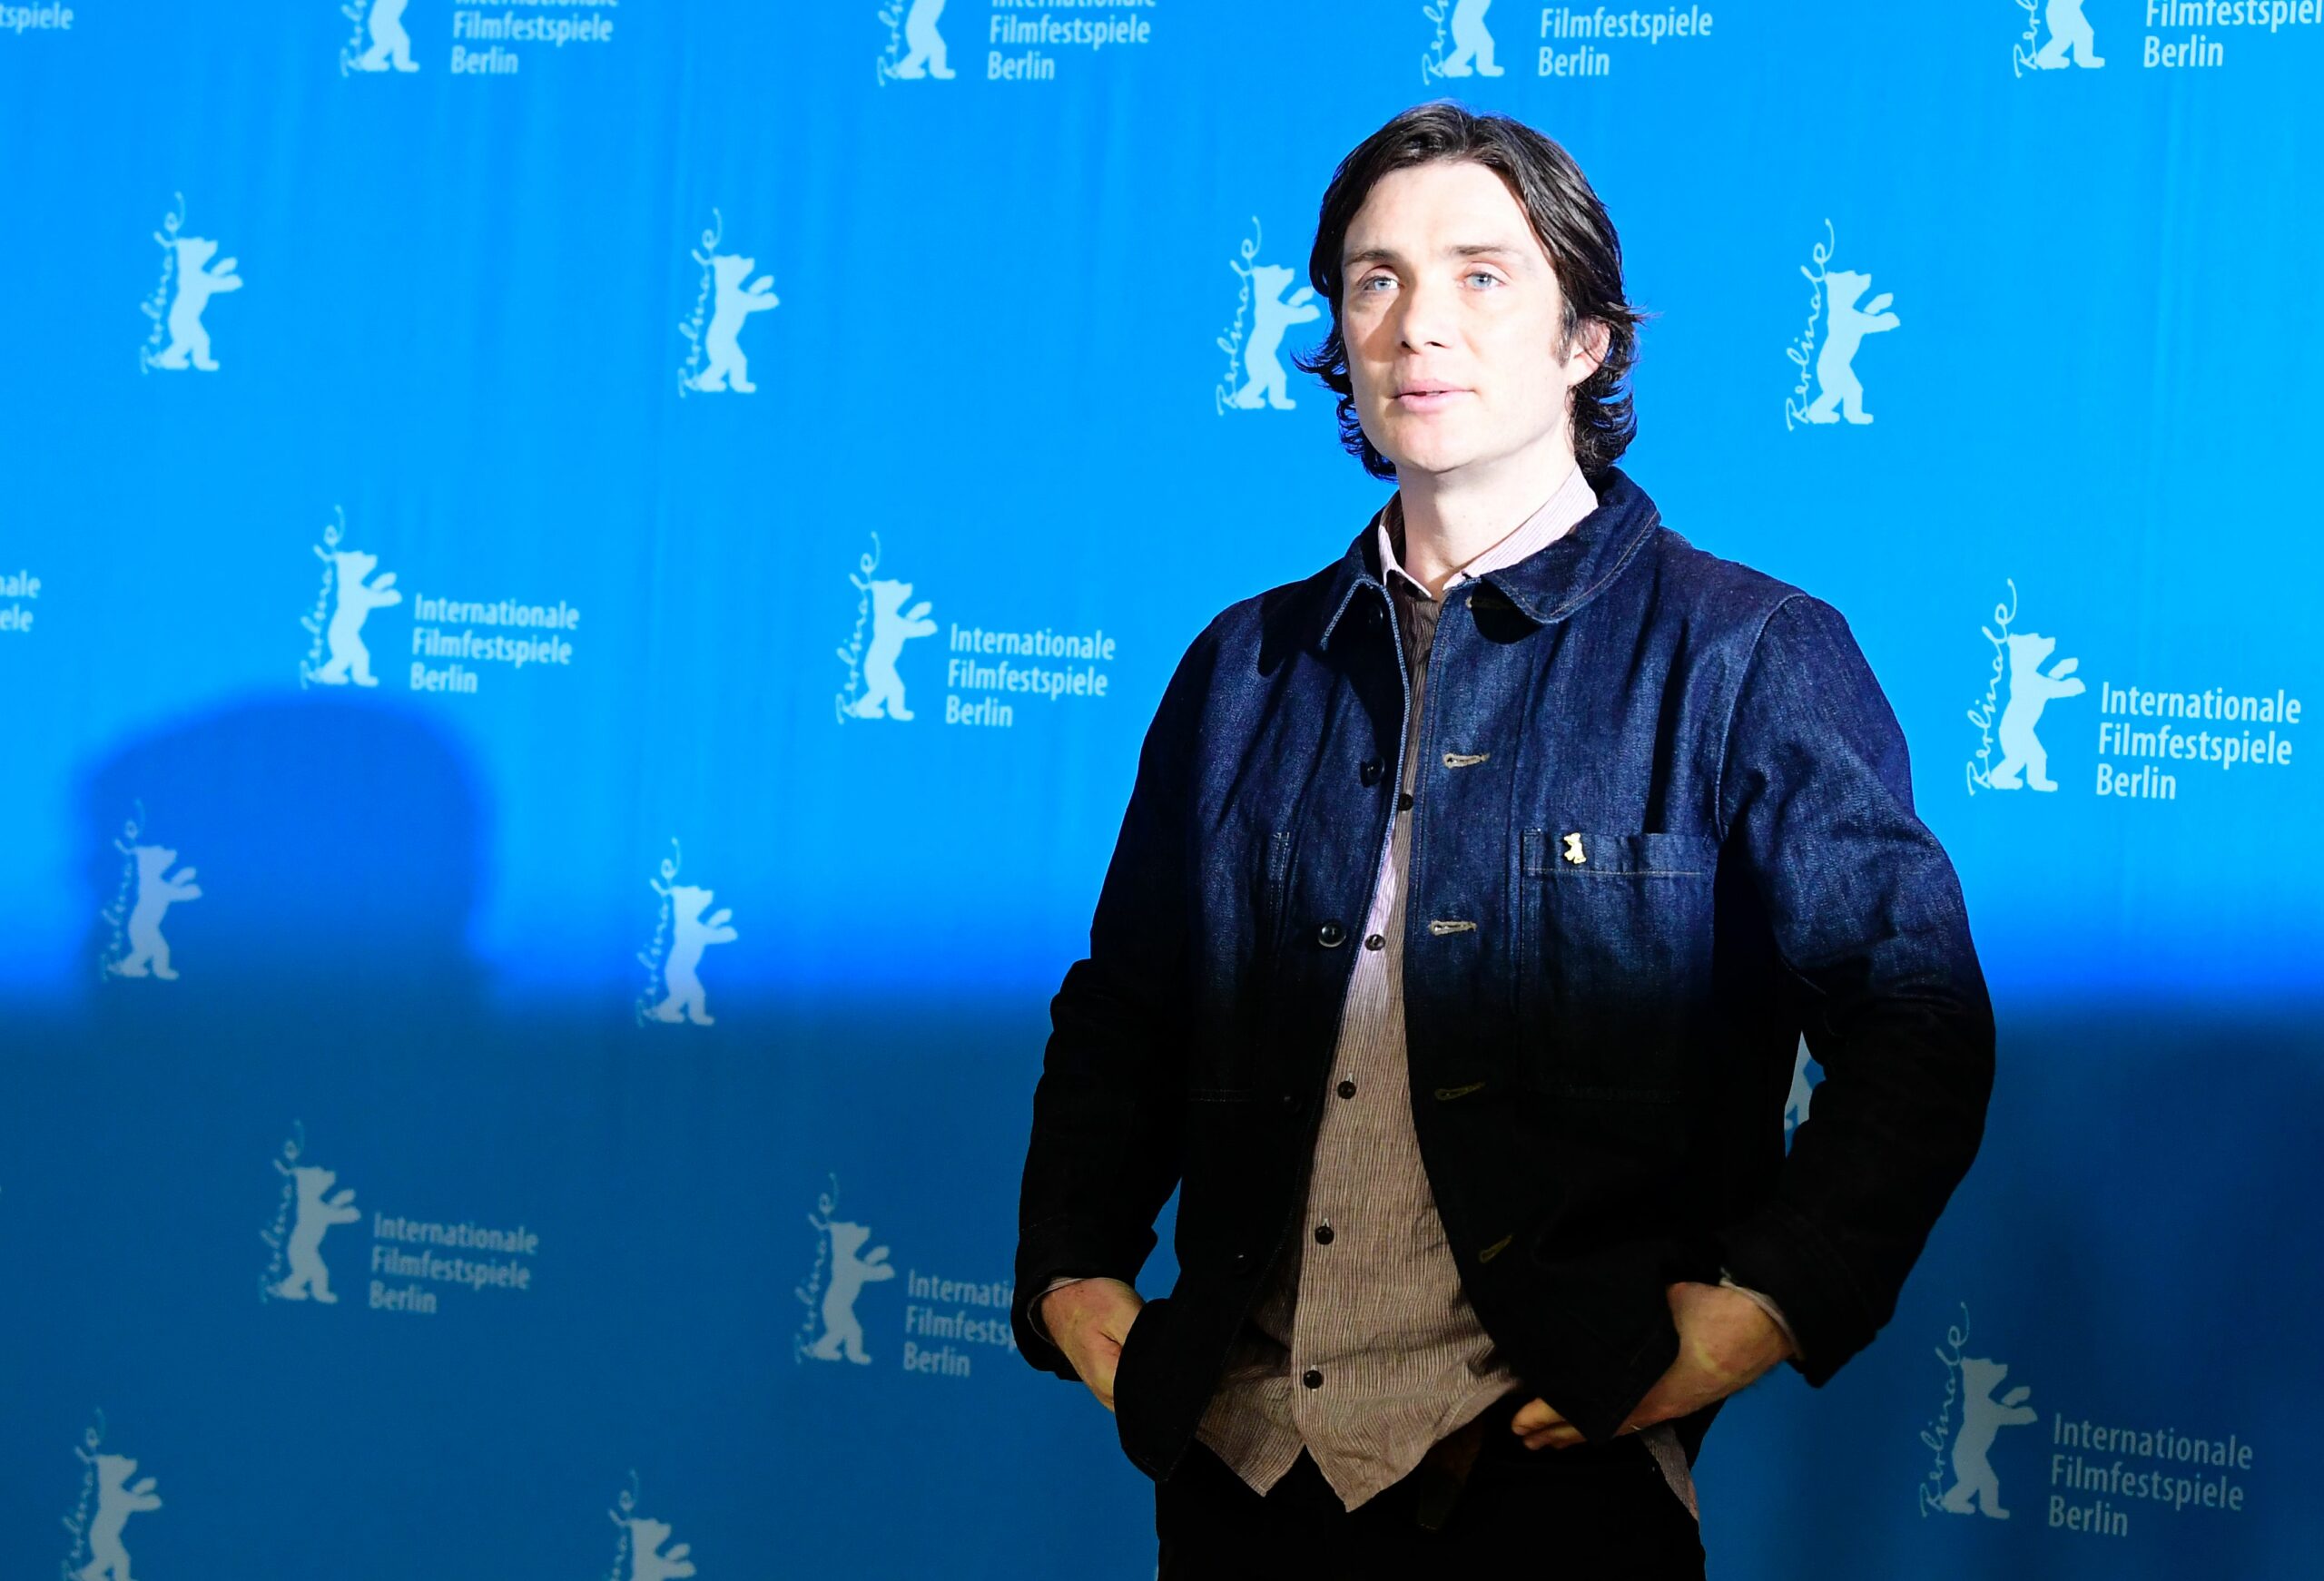 Cillian Murphy is one of the top actors in the world